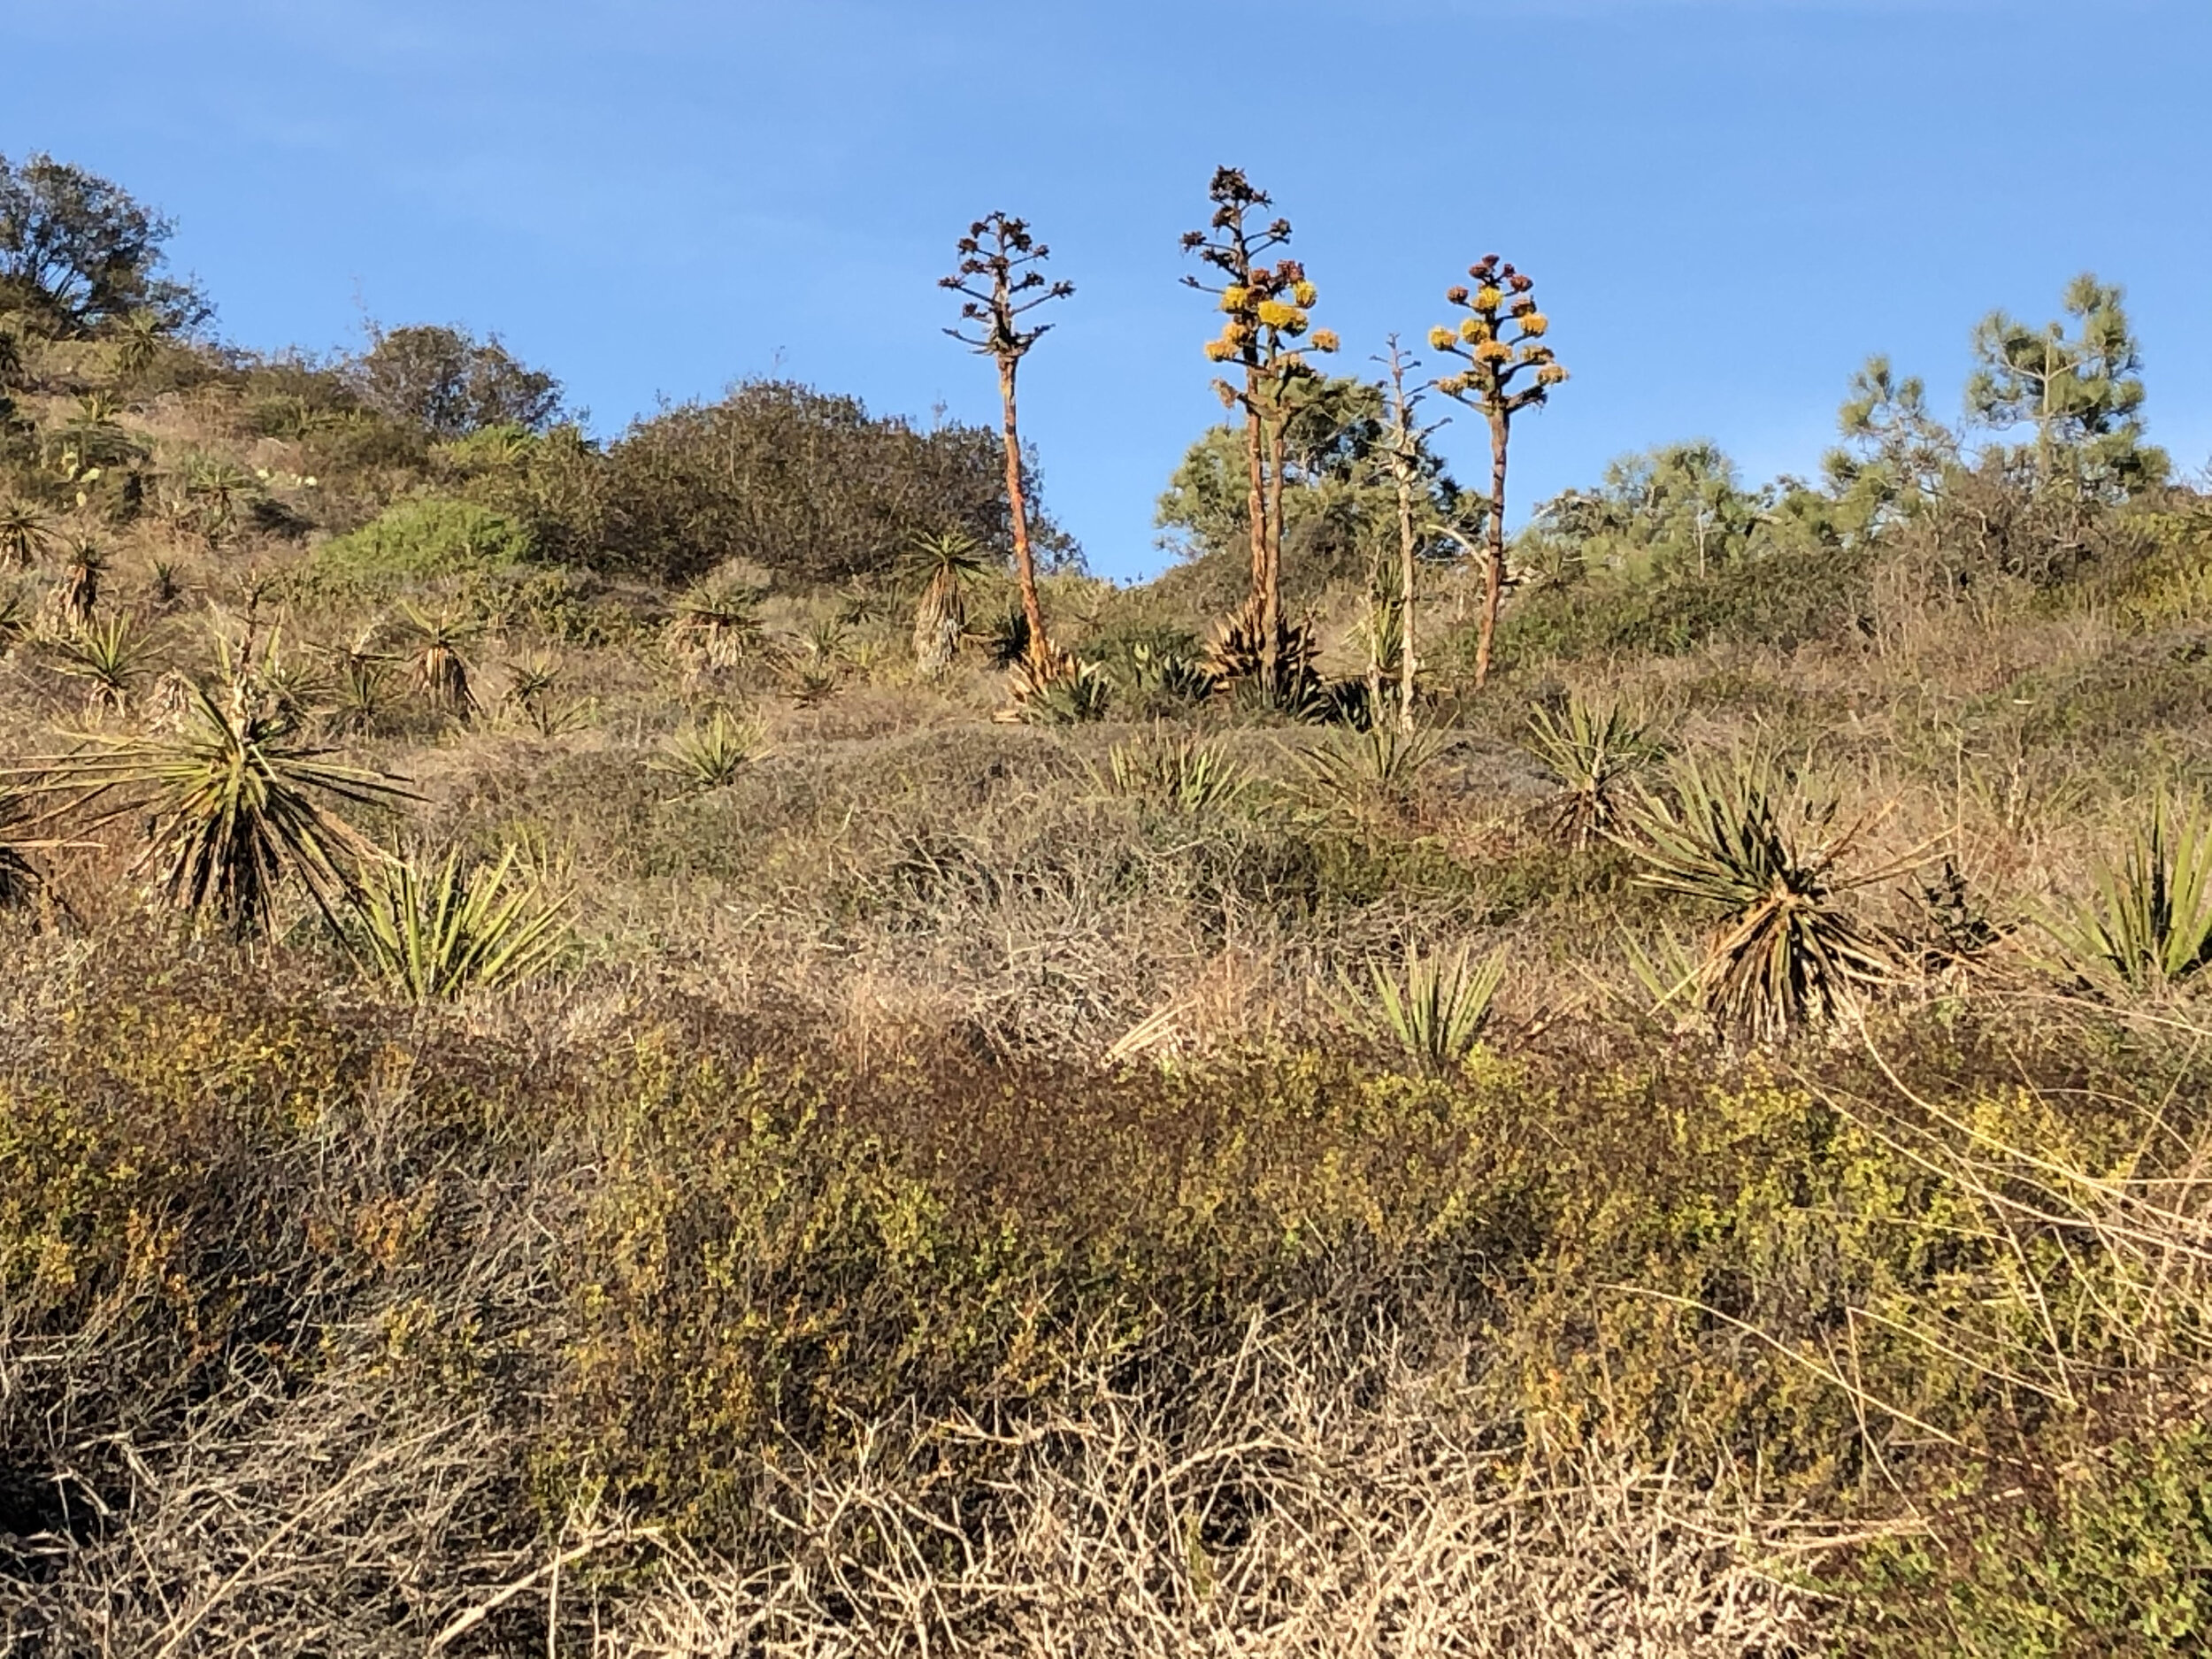 Coastal sage scrub at Torrey Pines State Reserve with Shaw's Agave (Agave shawii), Mojave Yucca (Yucca schidigera)&nbsp;and Torrey Pines (Pinus torreyana).